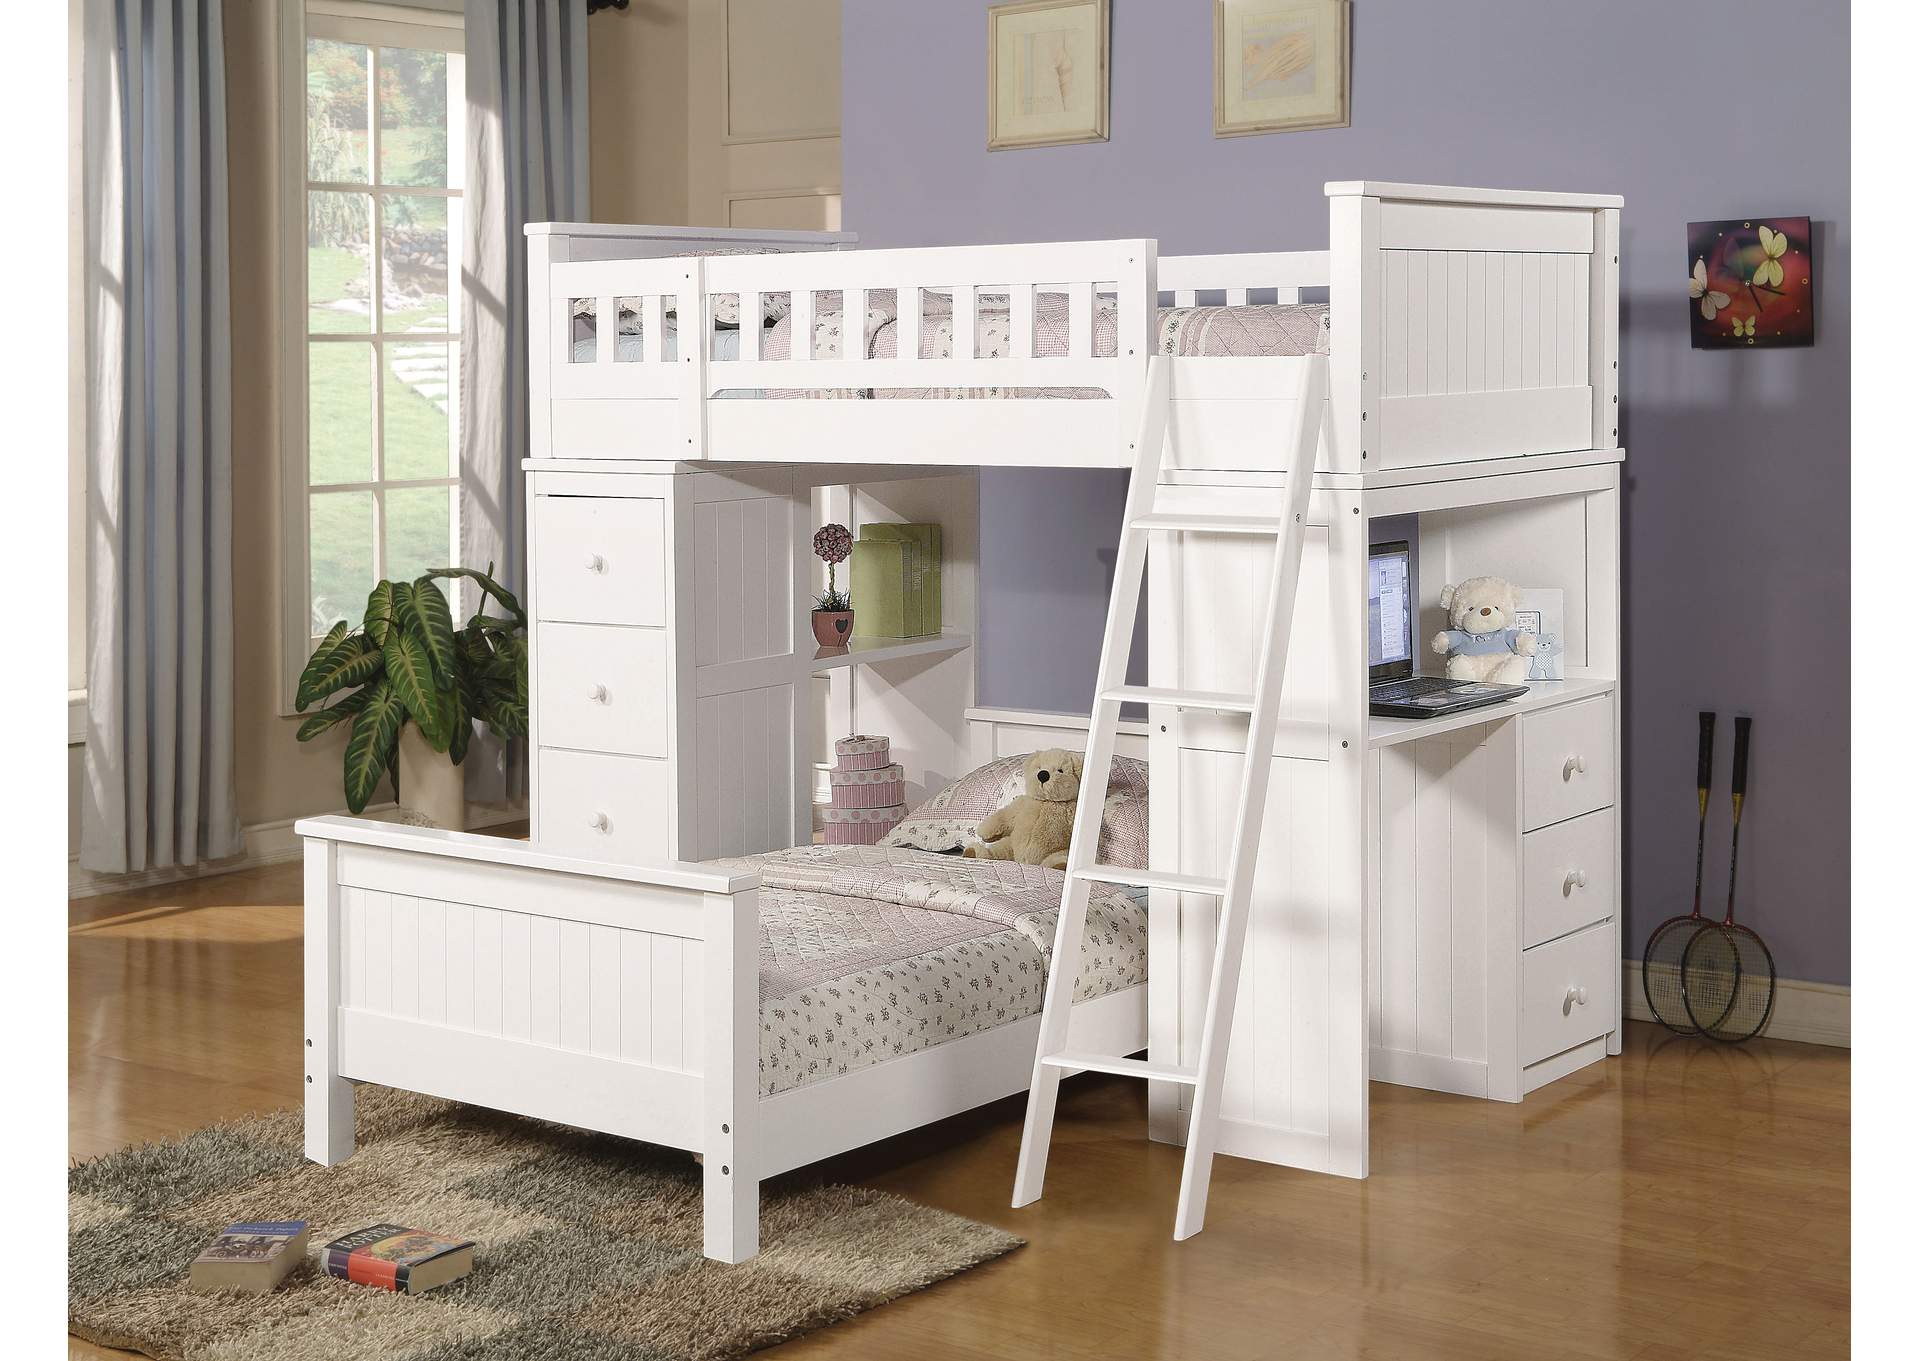 Willoughby White Twin Bed,Acme